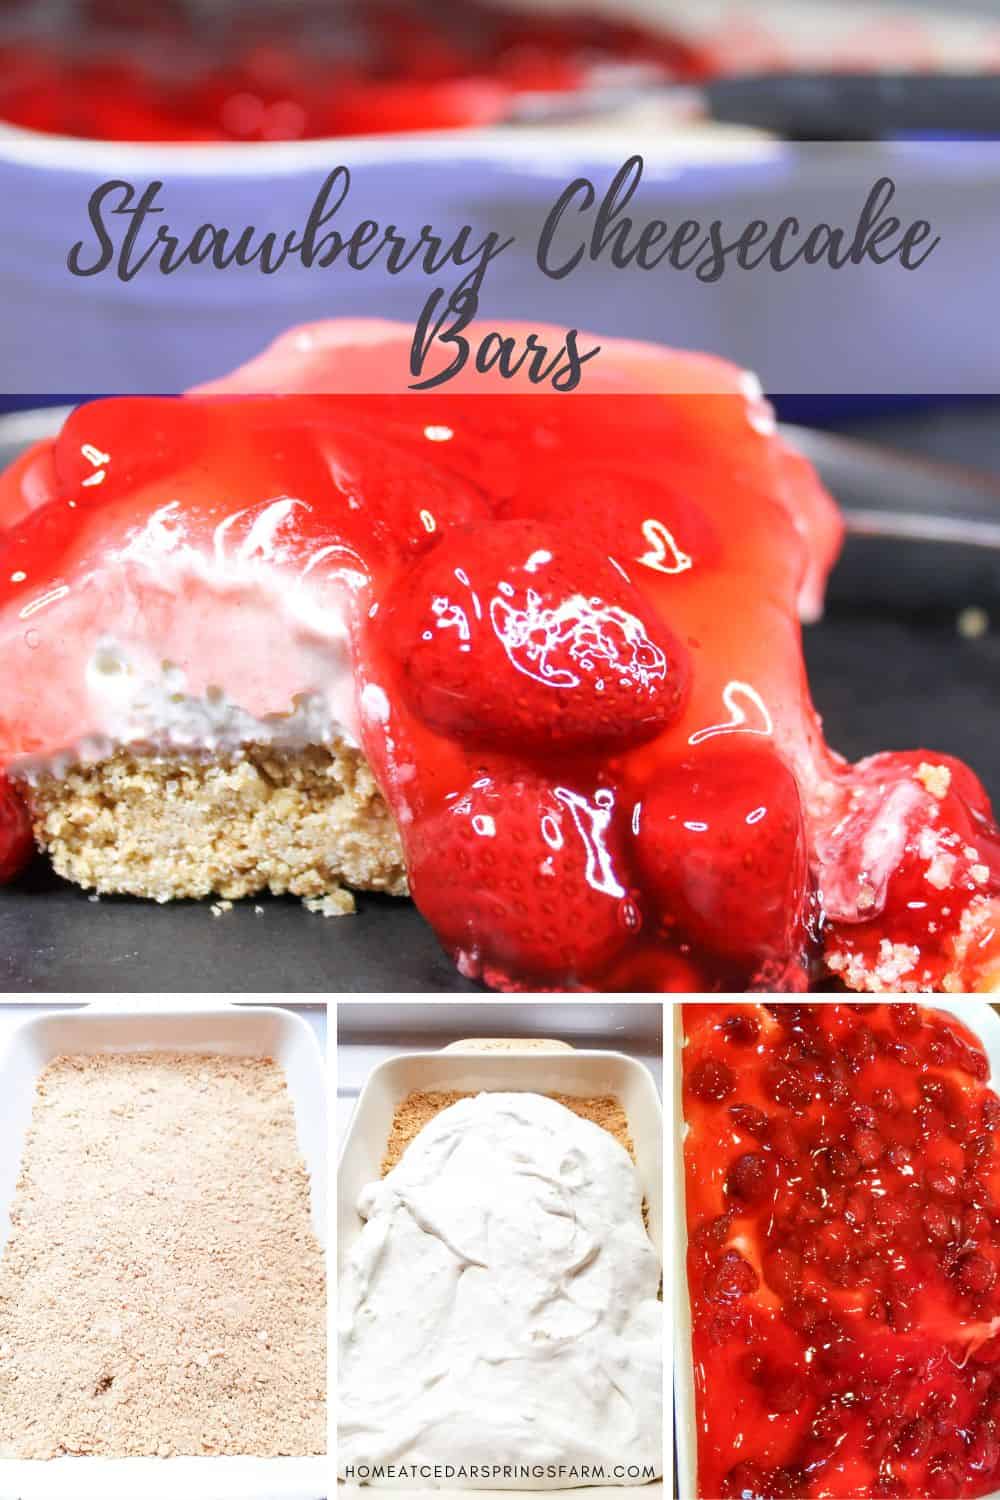 Steps to make Strawberry Cheesecake shown on a plate with text overlay.